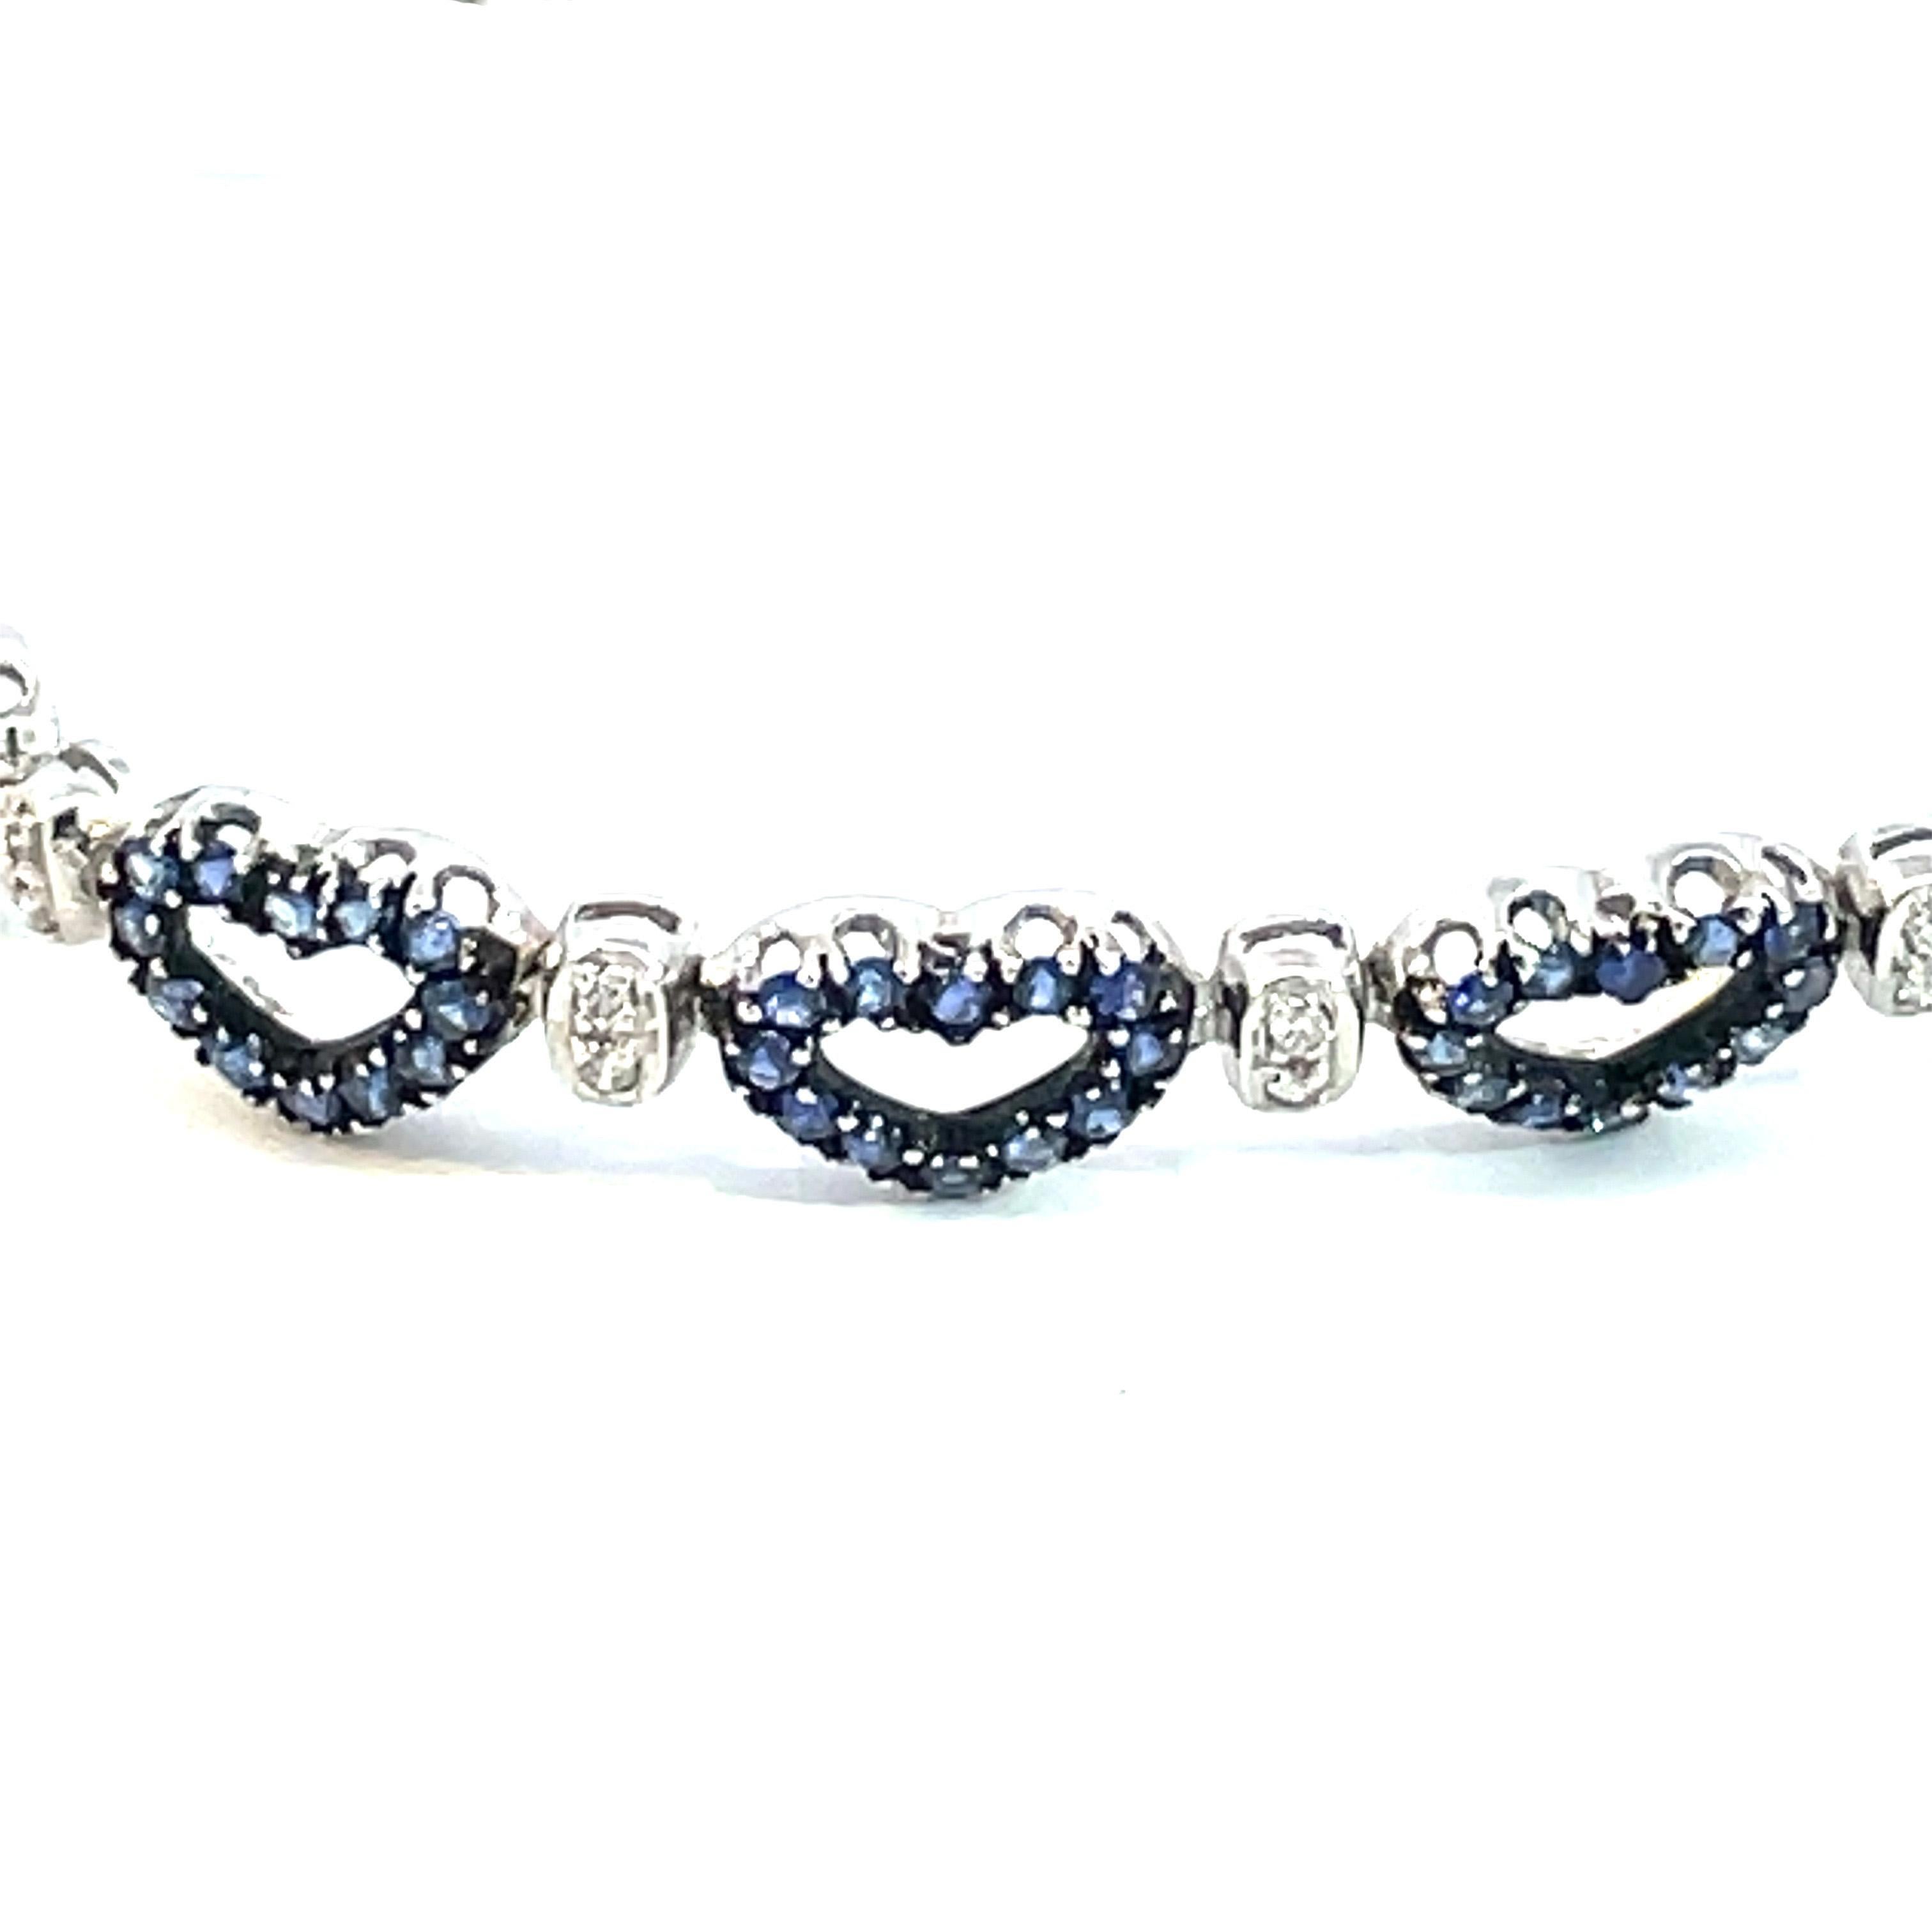 One 18kt white gold hearts shape bracelet with natural blue sapphires and brilliant cut diamonds with a black rhodium finish around the blue sapphires.  Perfect for everyday with a little splash of love. 

168 natural blue sapphires weighing 3.51ct